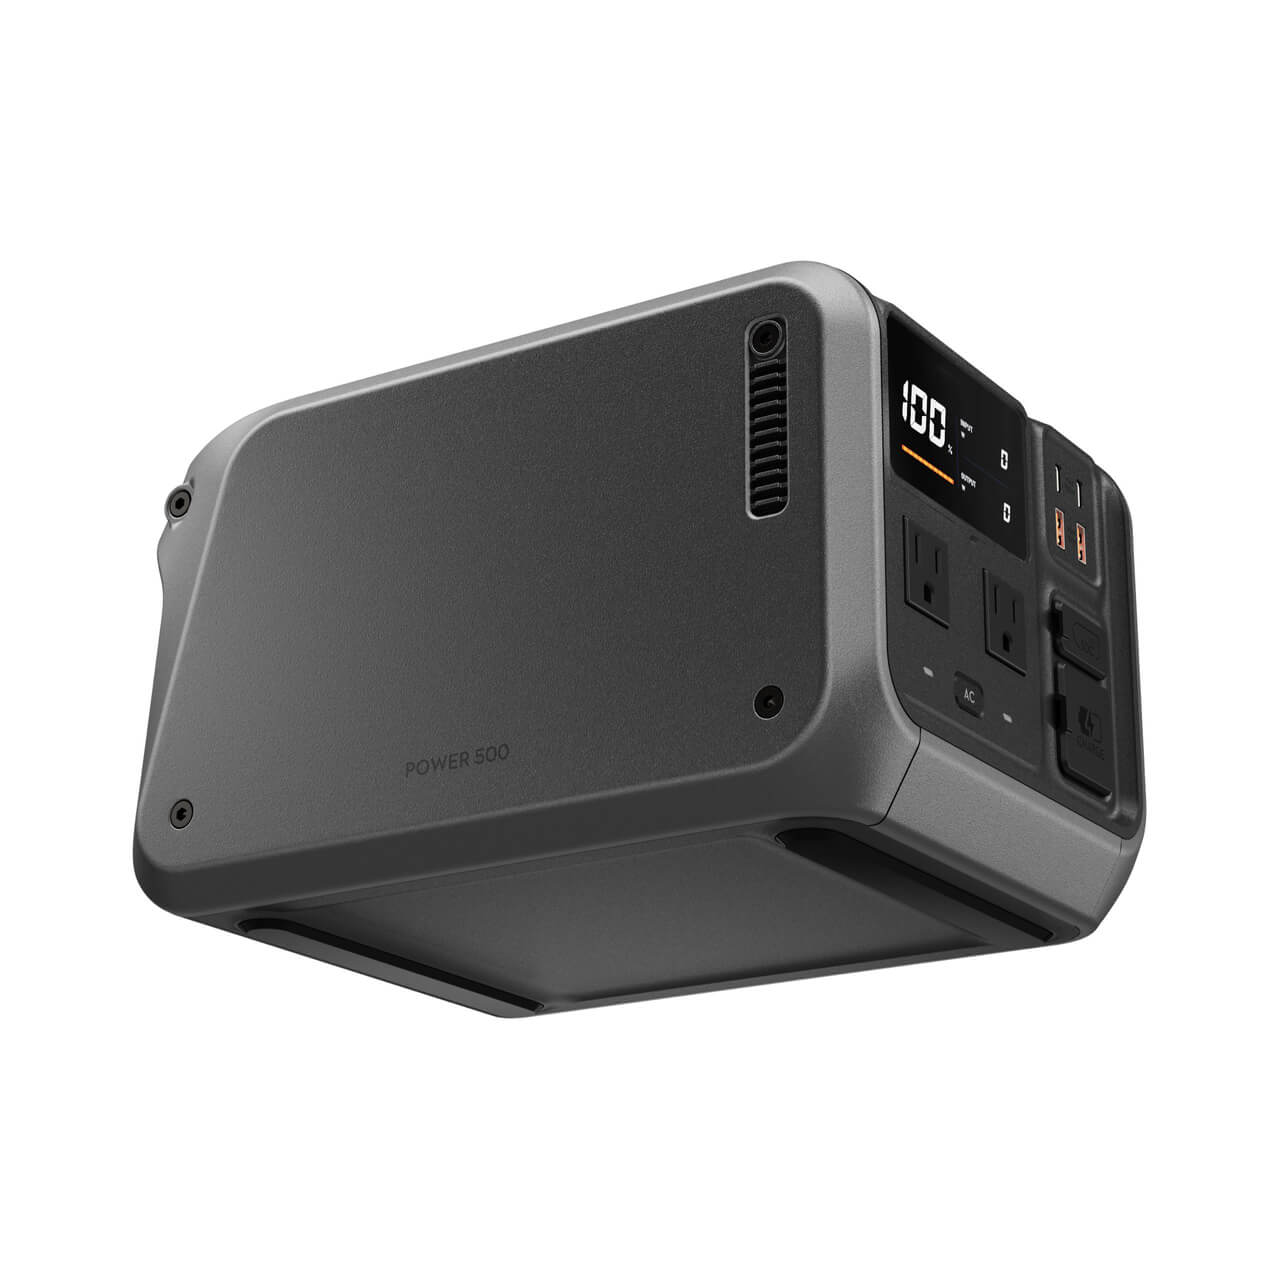 DJI's new Power station that can operate a microwave- DJI POWER 1000 & 500 2